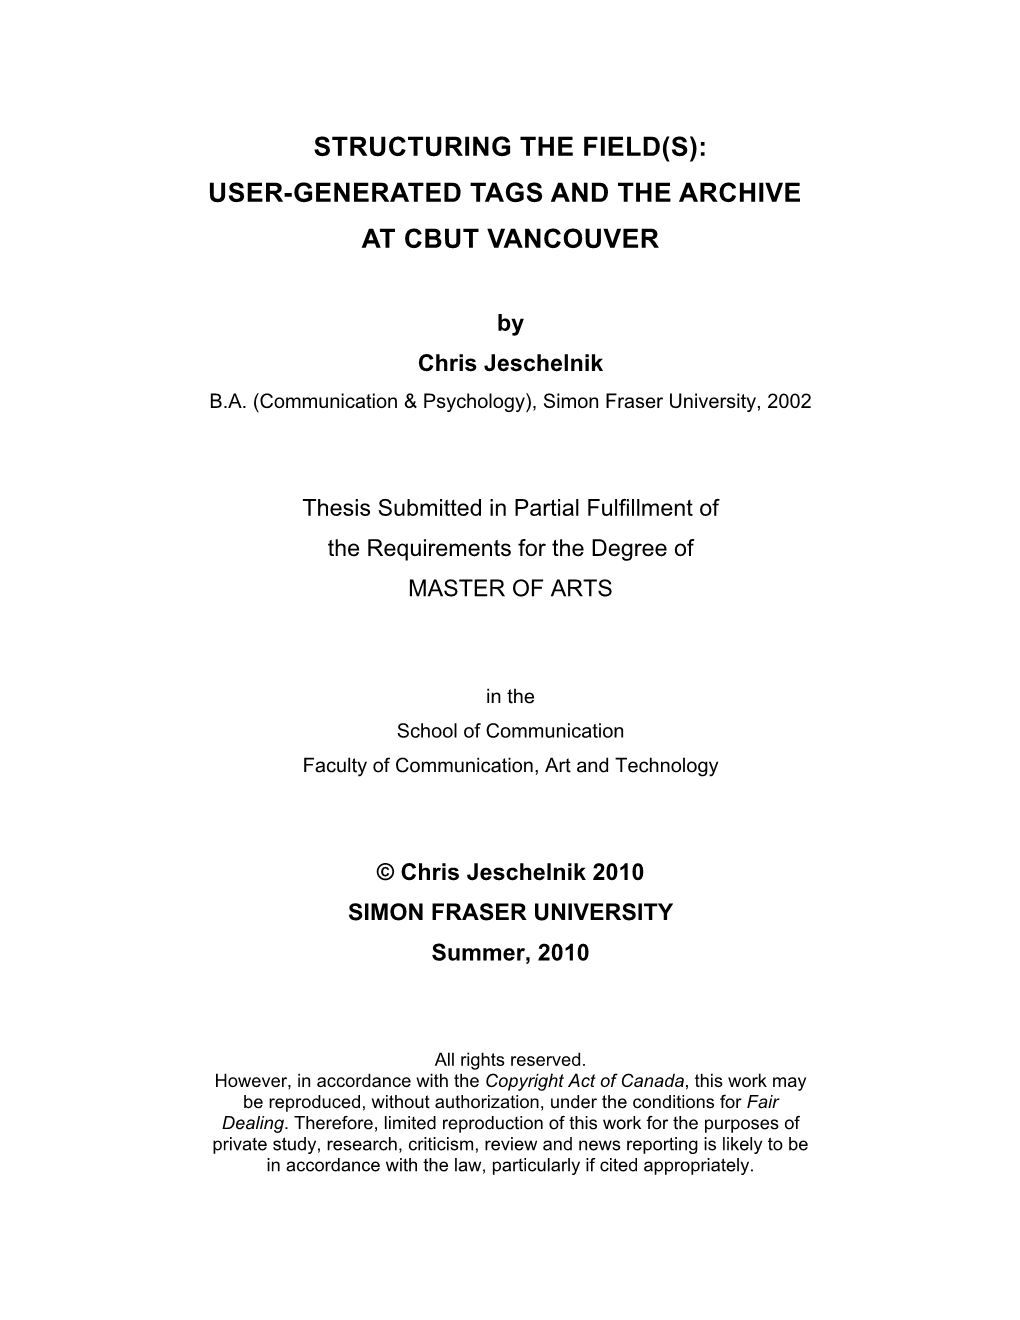 Structuring the Field(S): User-Generated Tags and the Archive at Cbut Vancouver